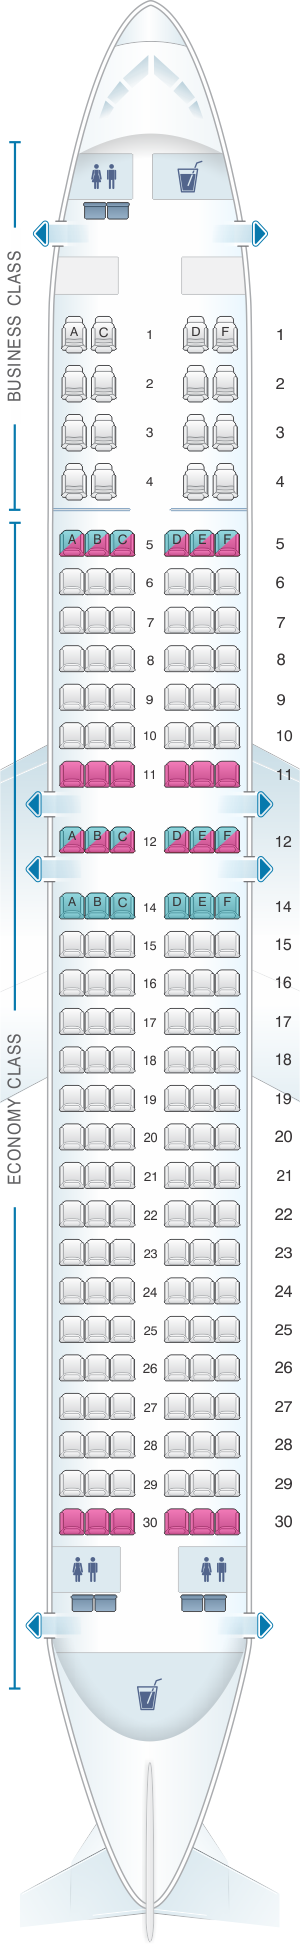 Seat Map Malaysia Airlines Boeing B737 800 166PAX | SeatMaestro